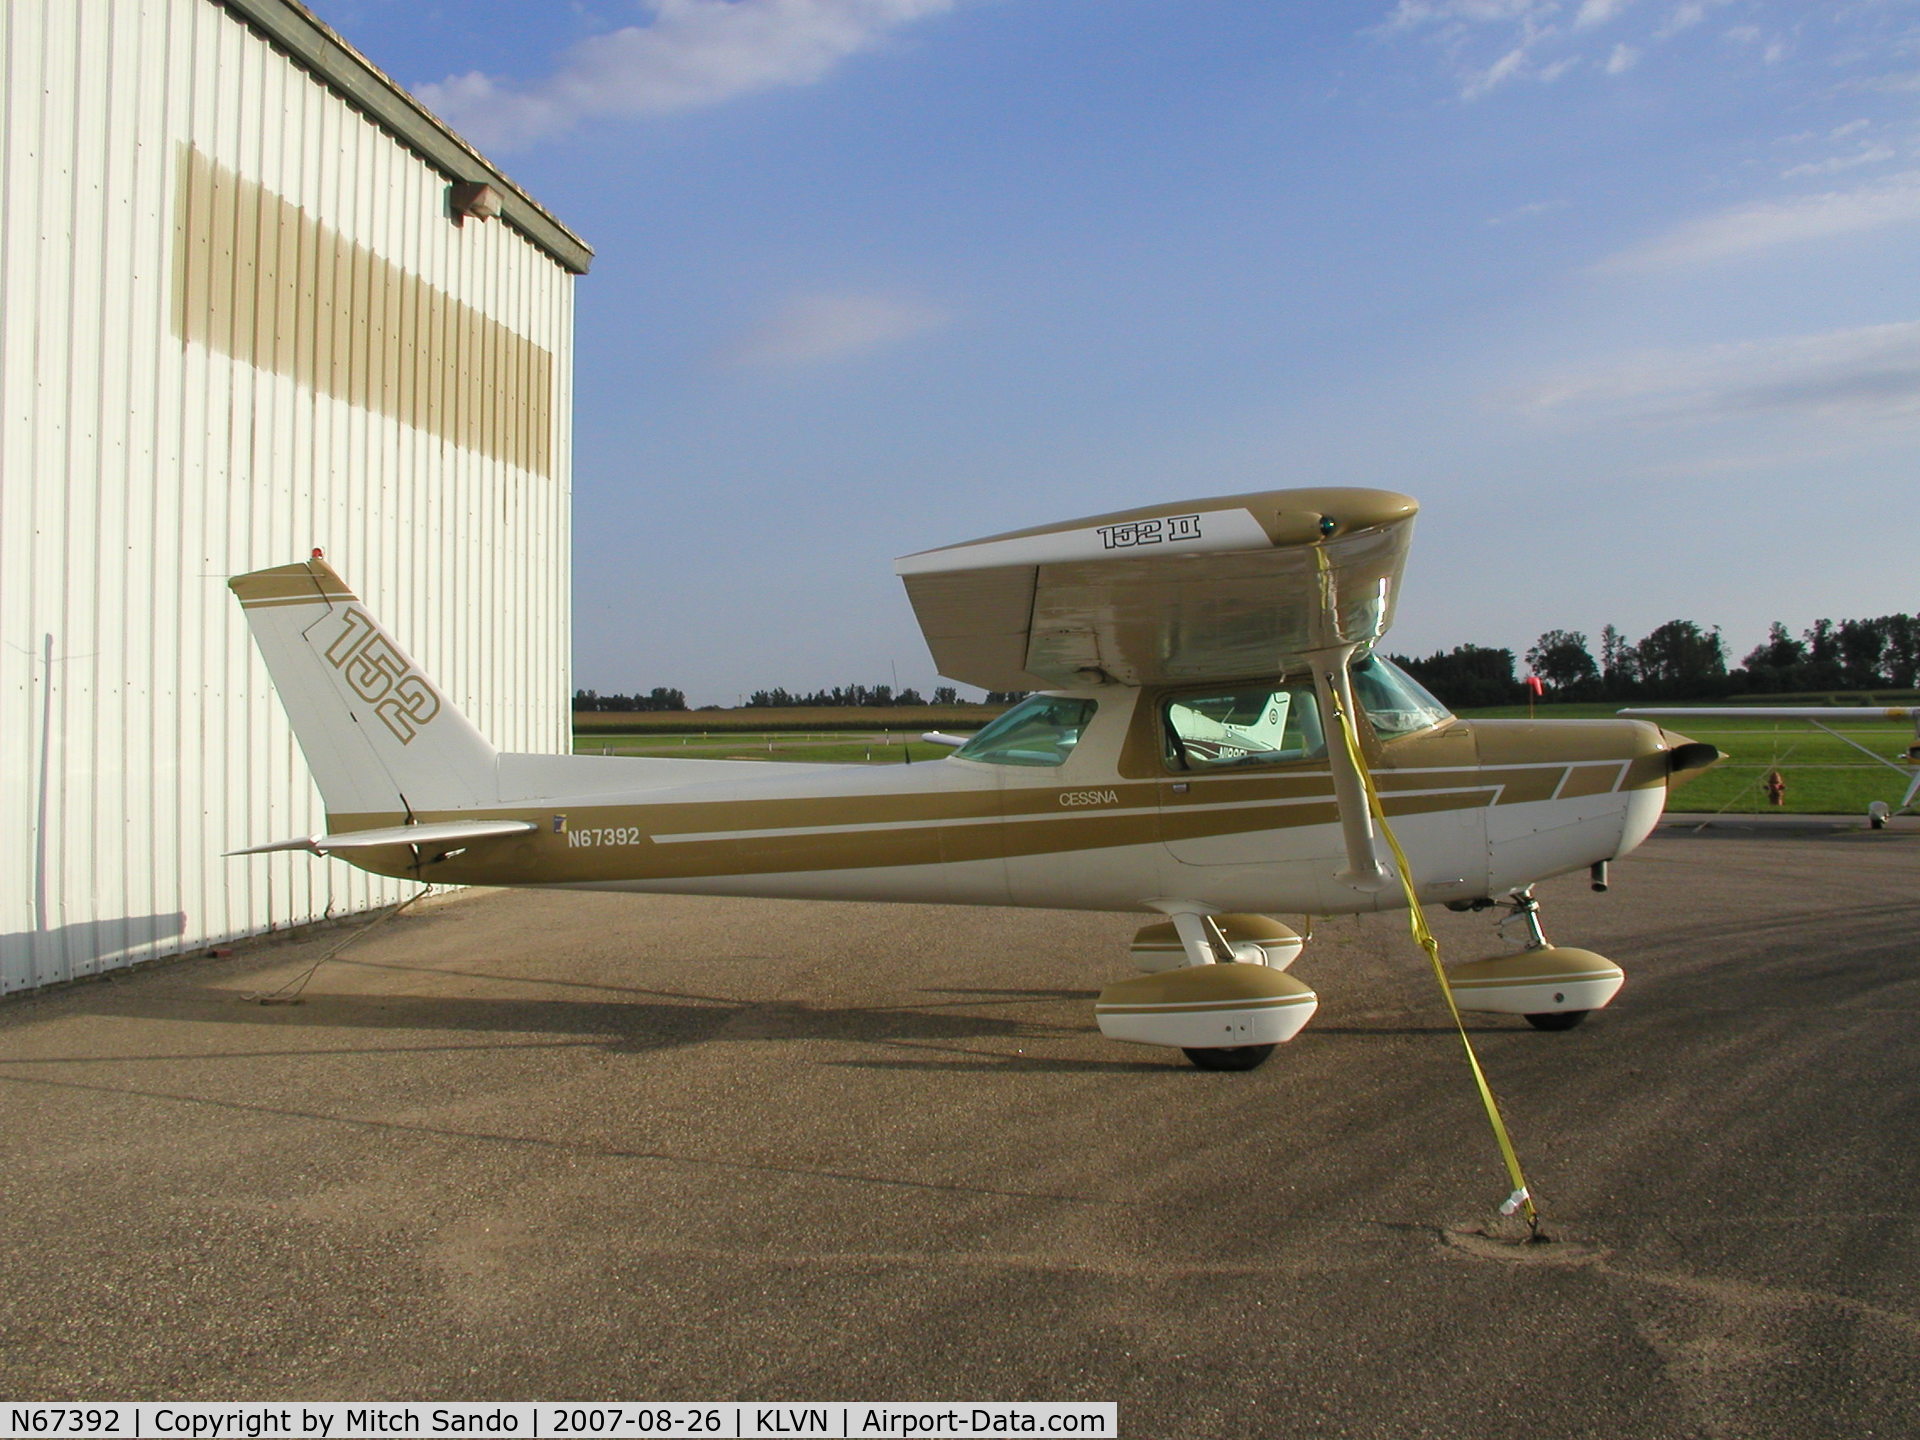 N67392, 1978 Cessna 152 C/N 15281808, Parked on the ramp at Airlake.